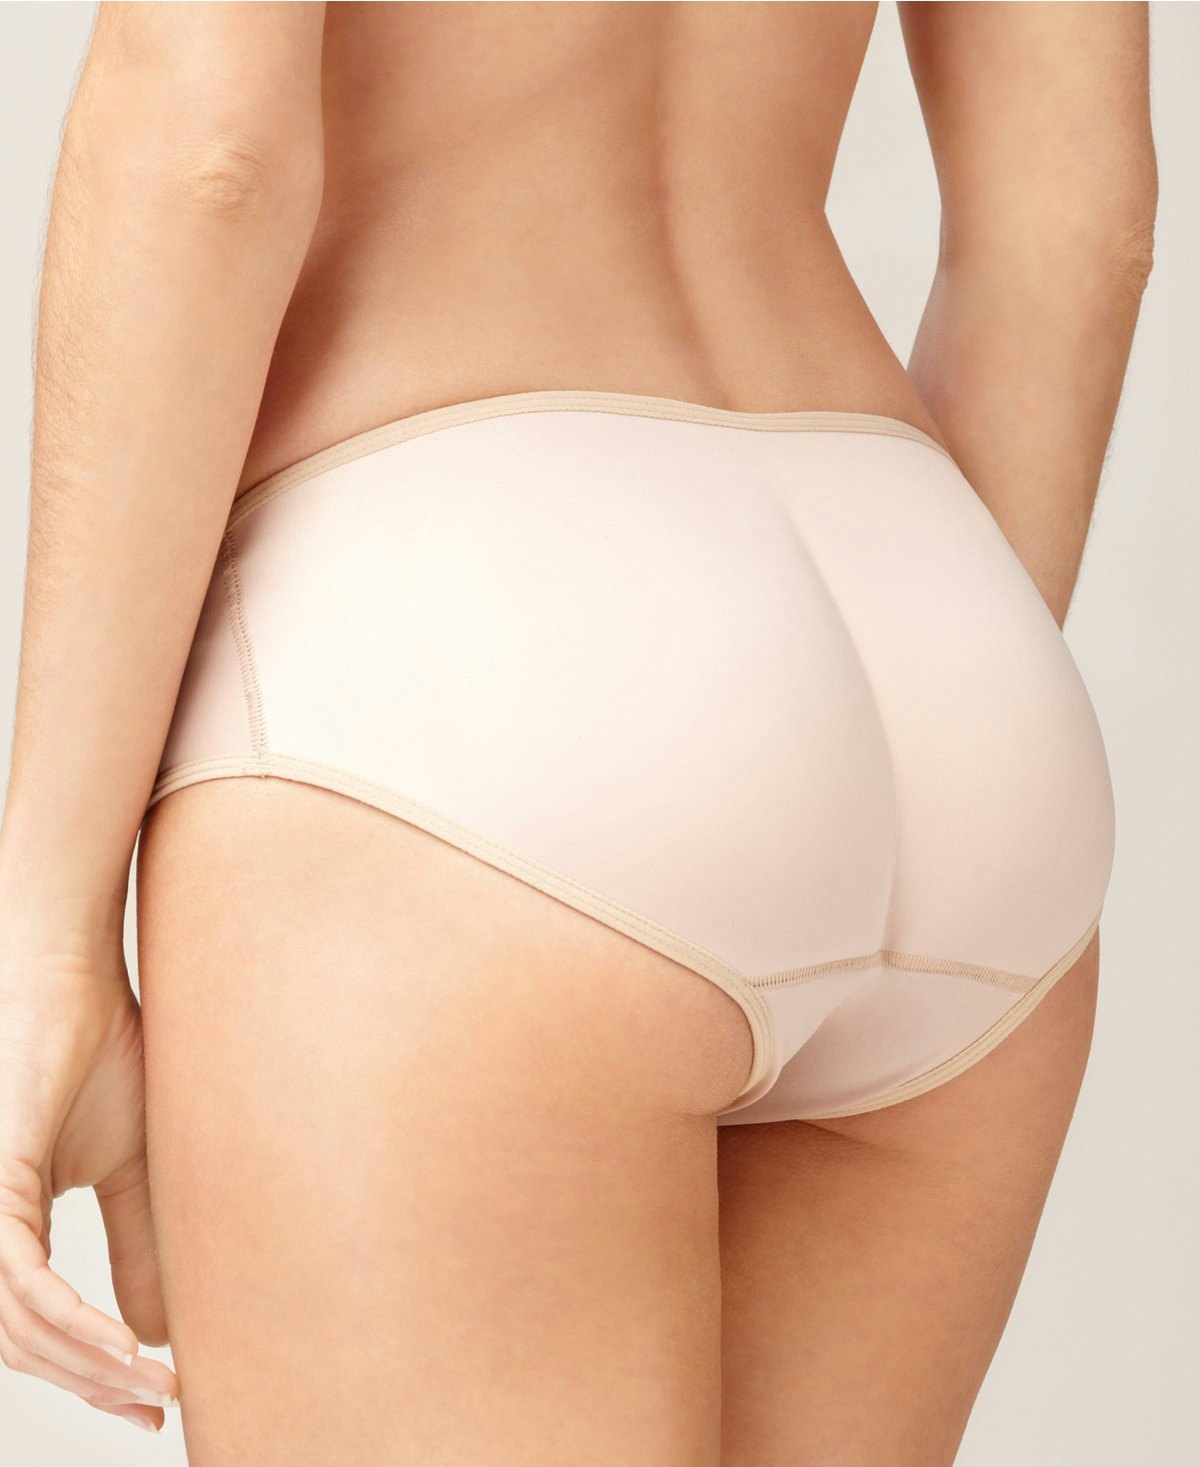 11 Weird Types Of Underwear That Are Actually Super Useful